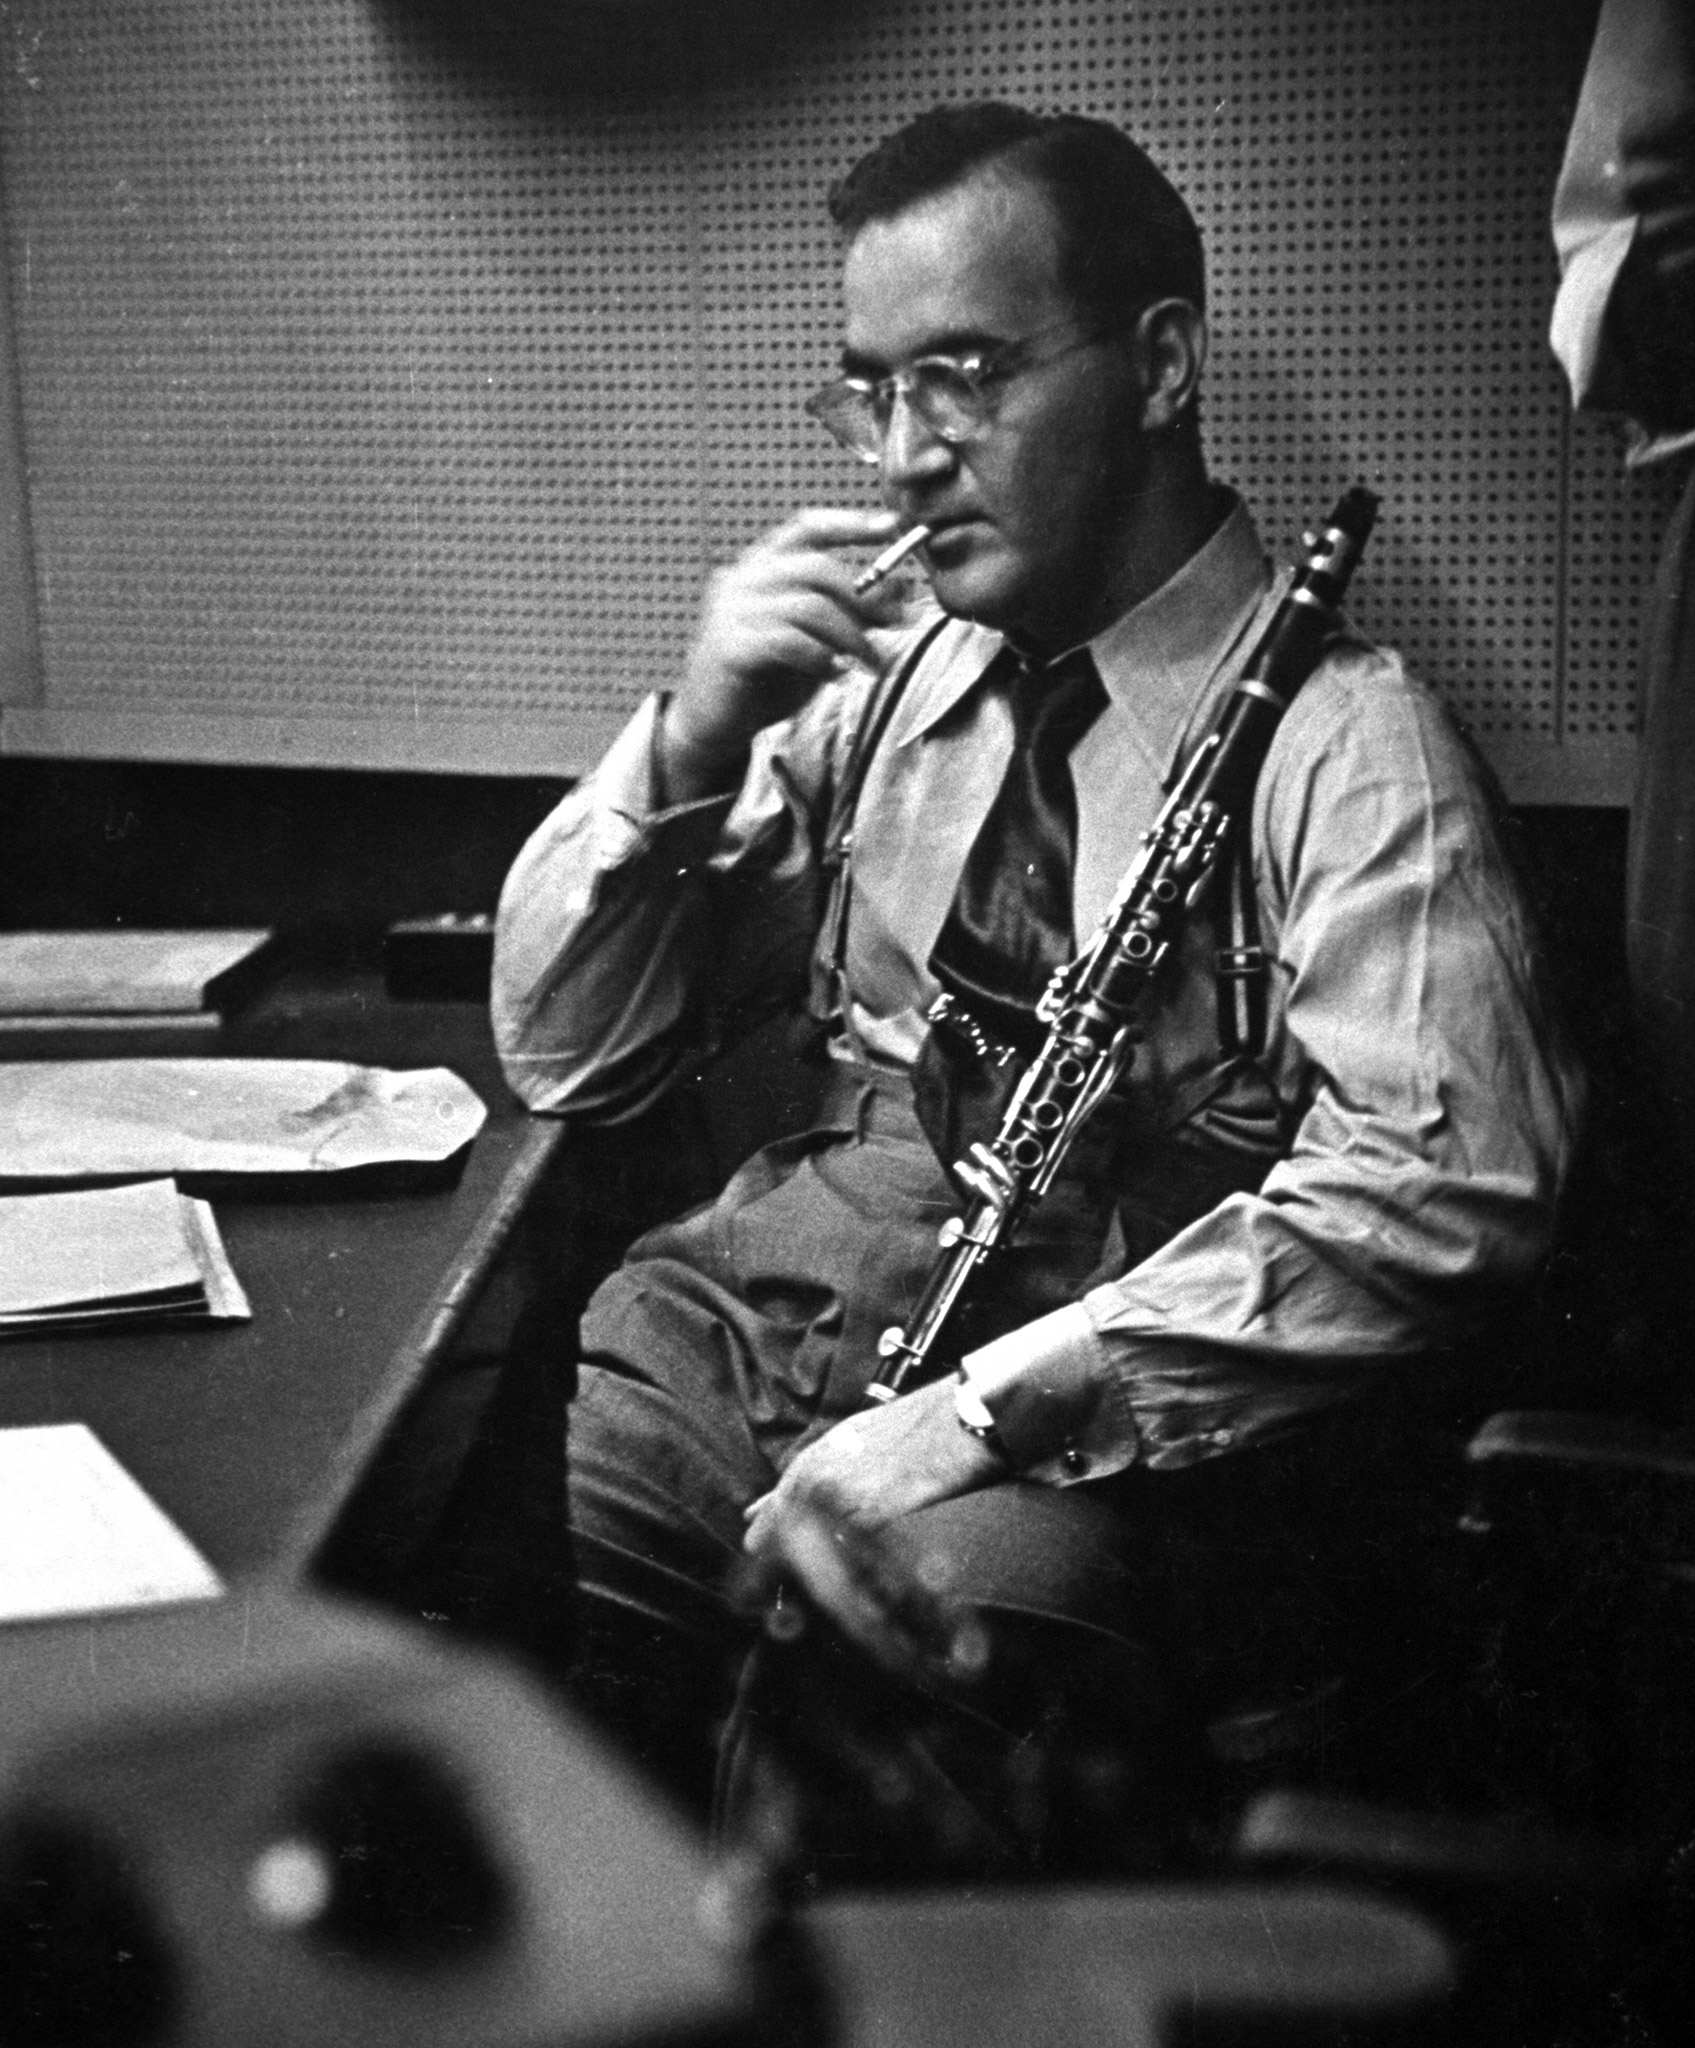 Clarinetist Benny Goodman smokes a cigarette while listening in a CBS recording session.